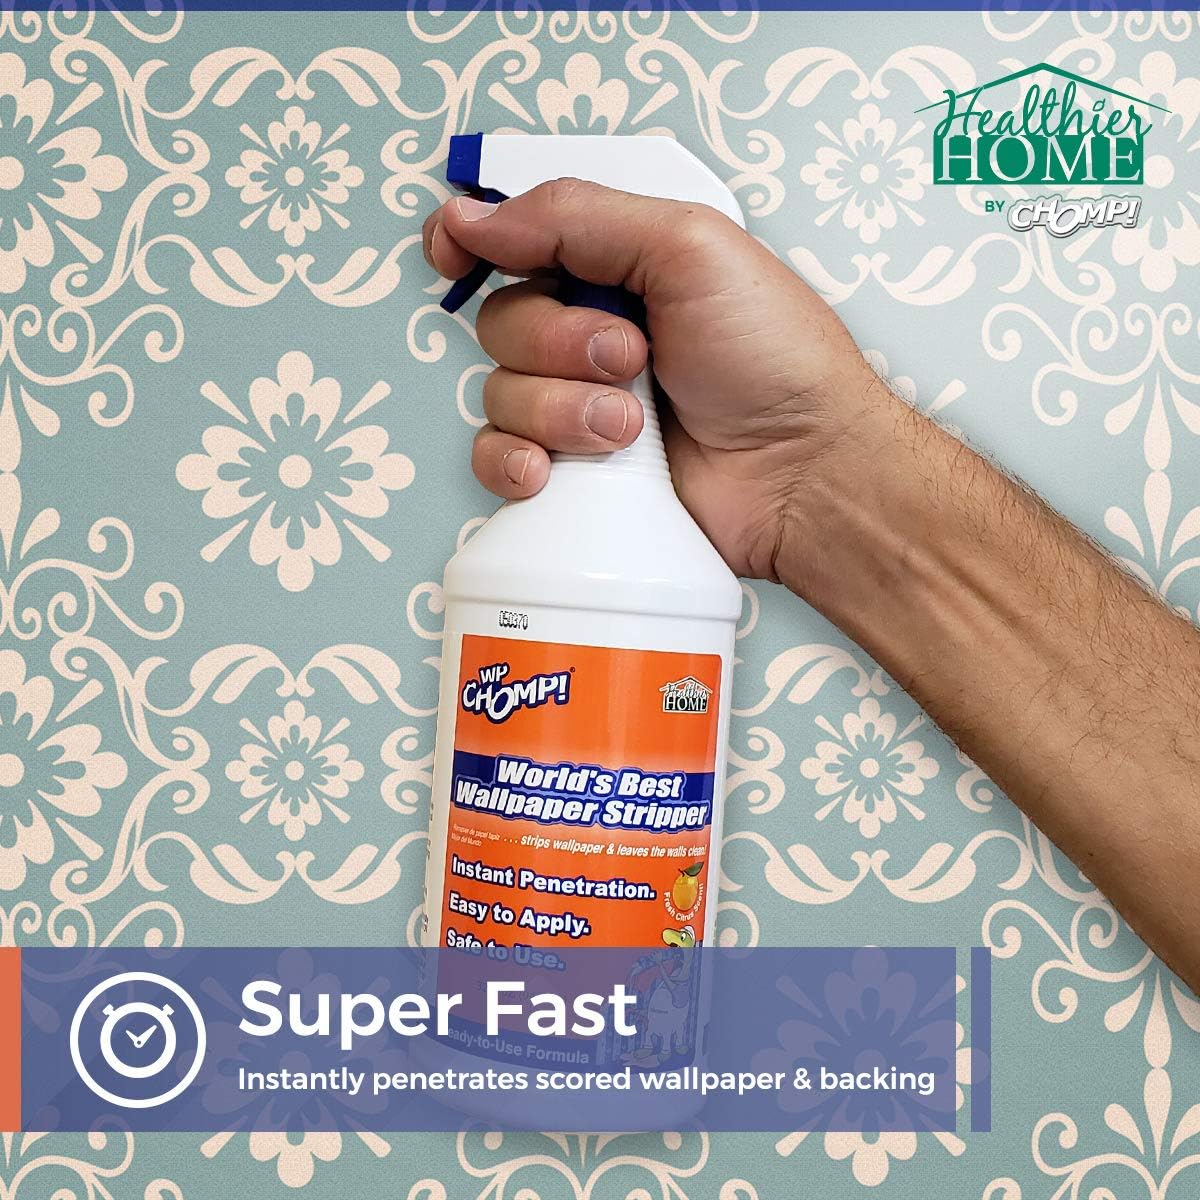 WP Chomp World’s Best Wallpaper Stripper: and Sticky Paste Remover, Citrus Scent 22oz Super Concentrate